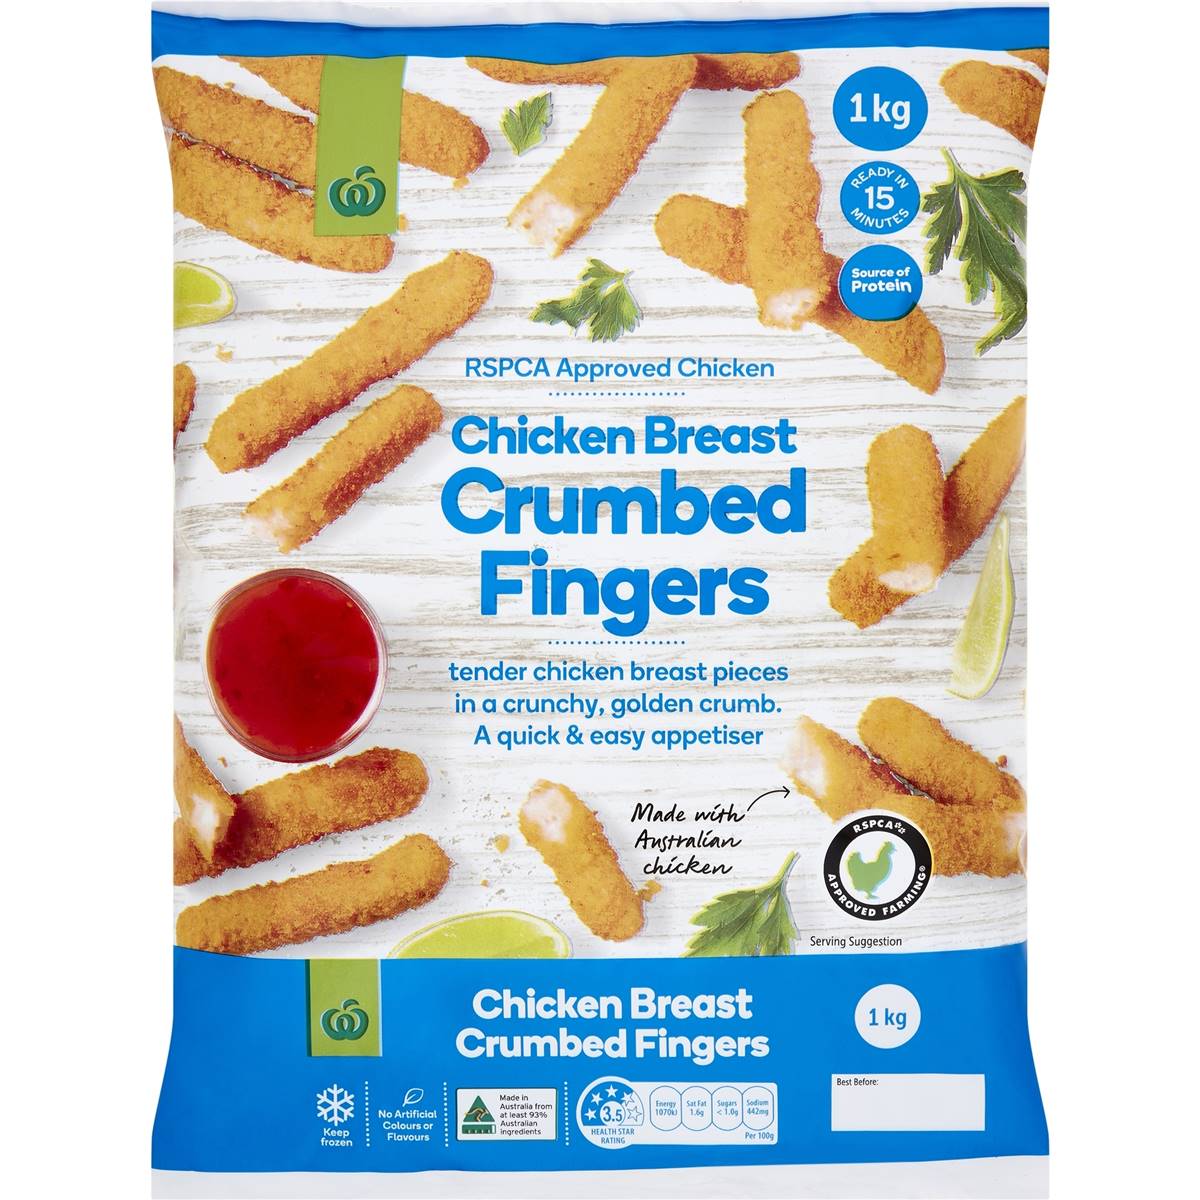 Calories in Woolworths Crumbed Chicken Breast Fingers